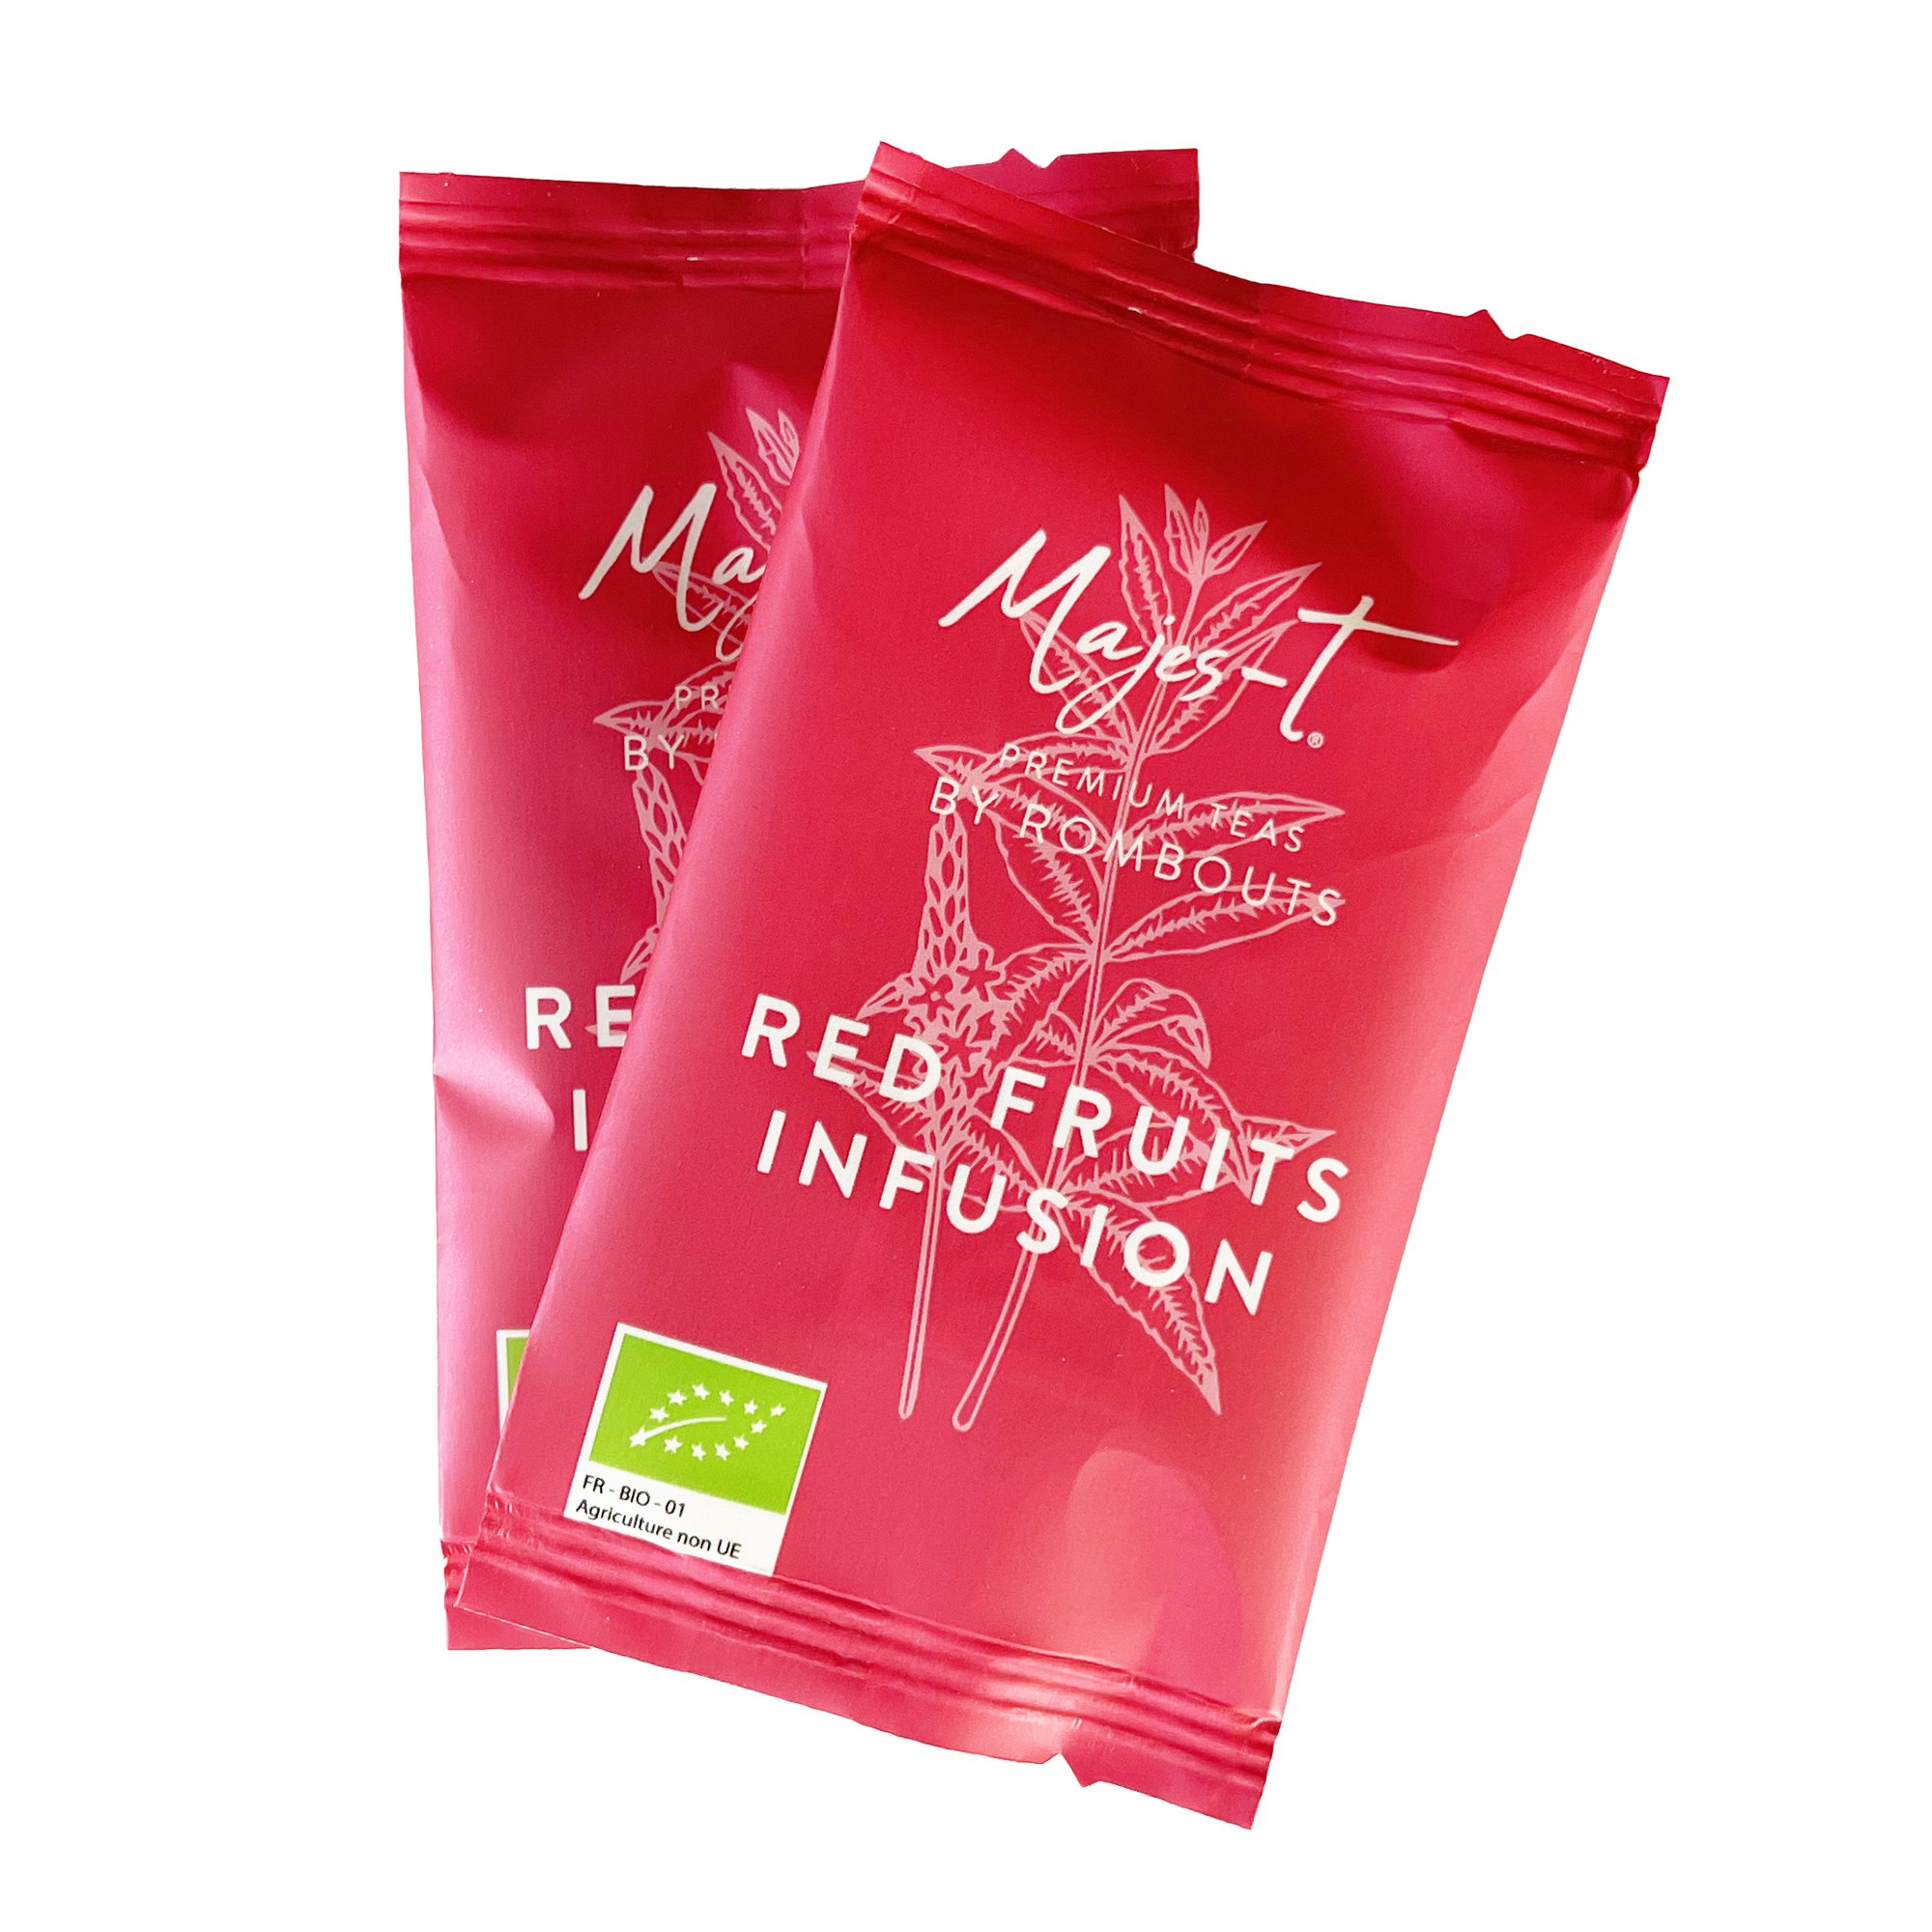 Majes-T Red Fruits Infusion 50st